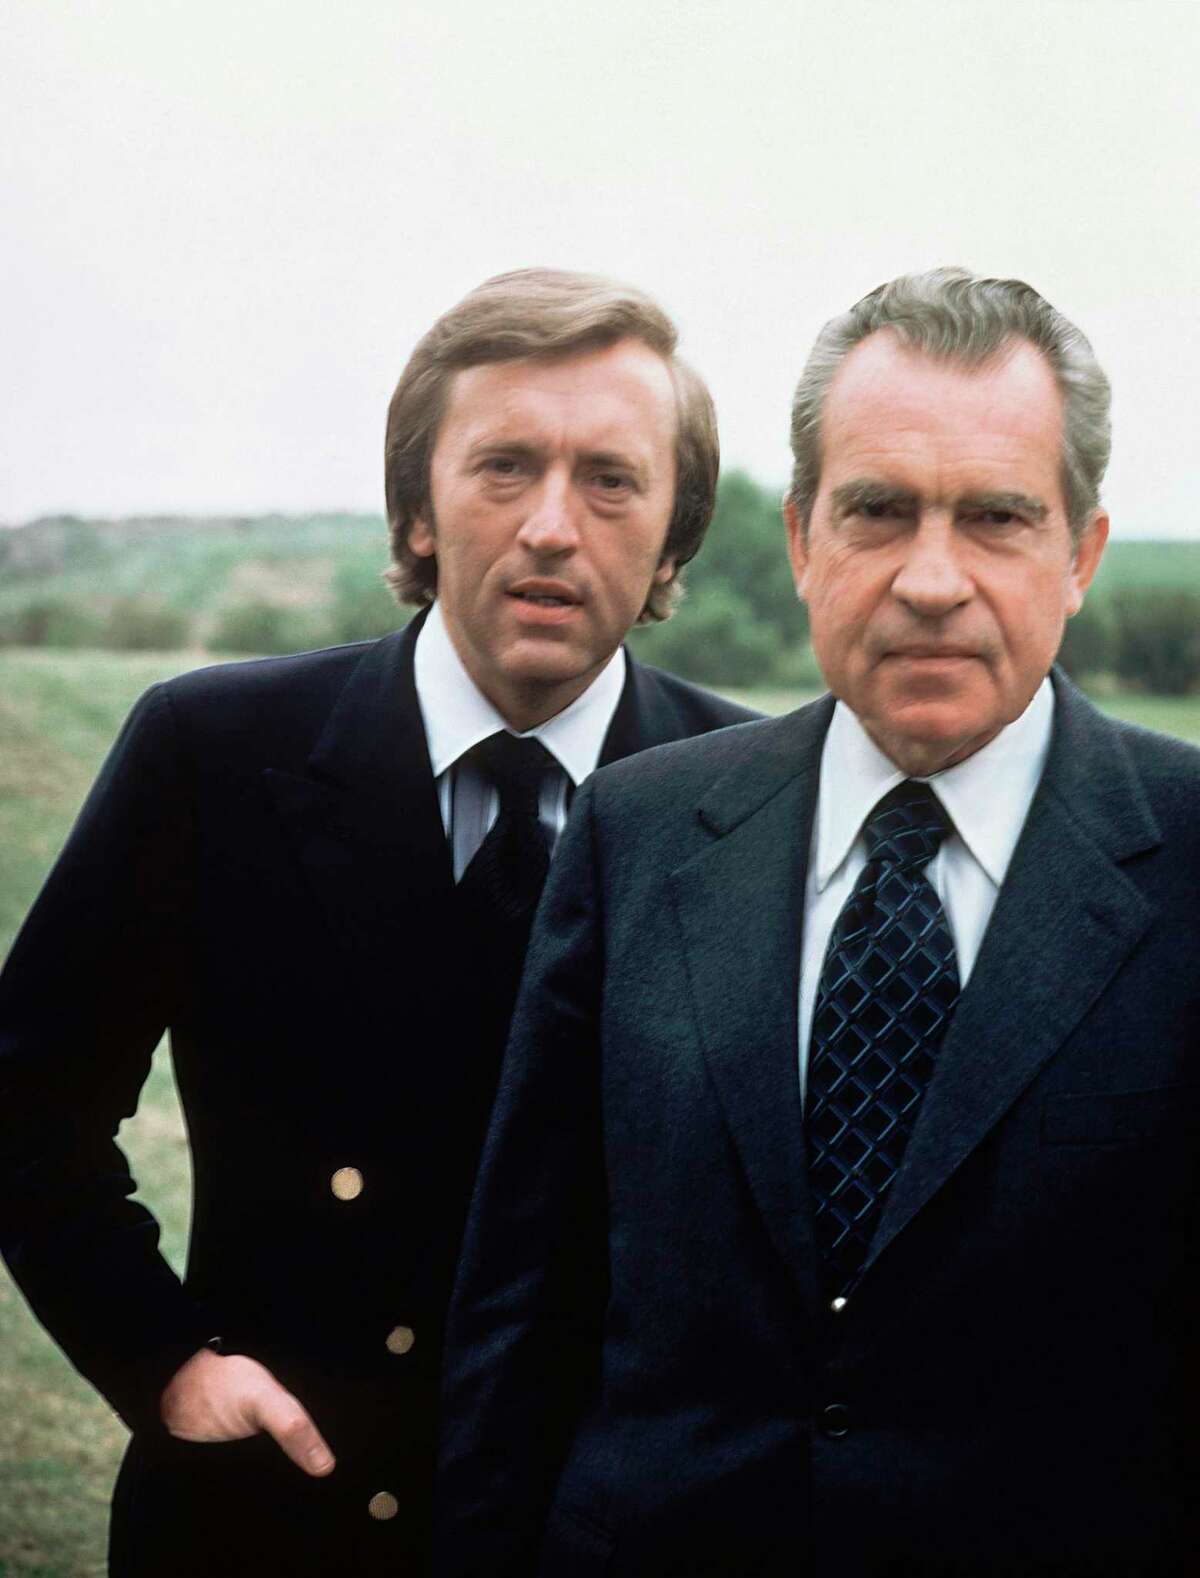 Former US President Richard M. Nixon, right, with broadcaster David Frost in California in this 1977 file photo.